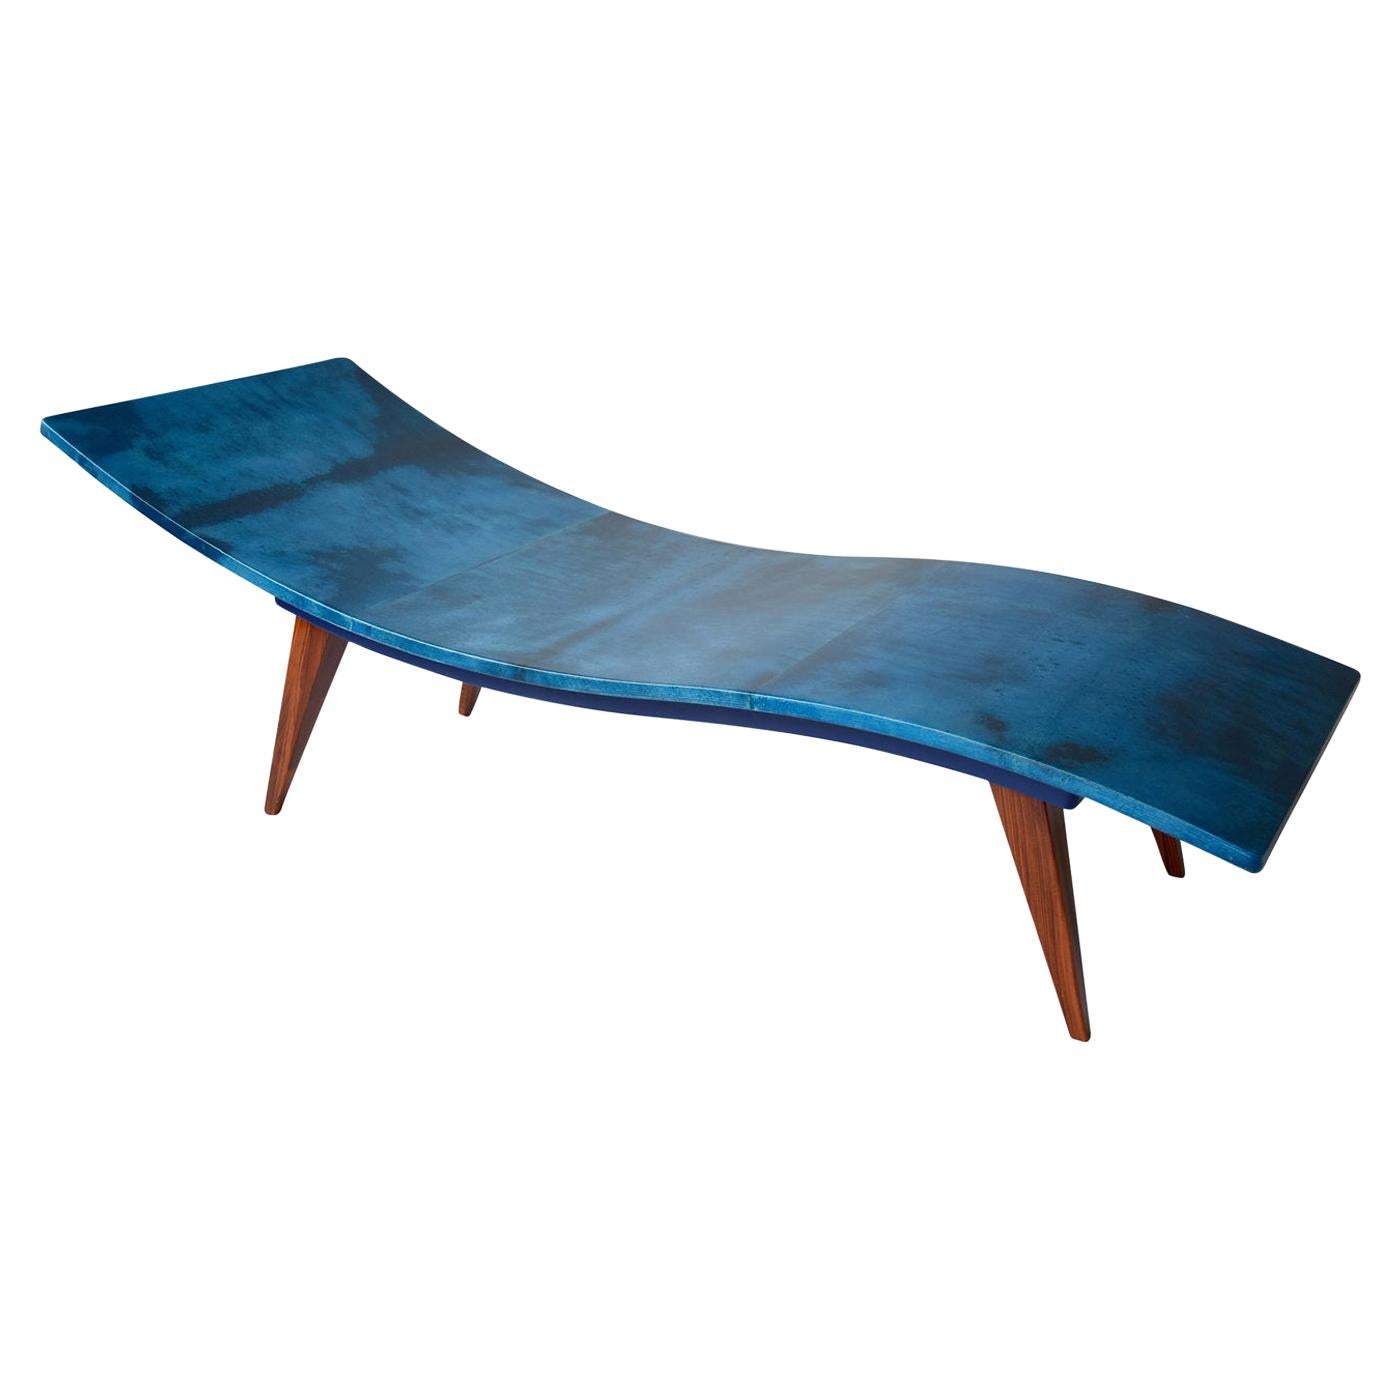 Oyster Chaise Longue